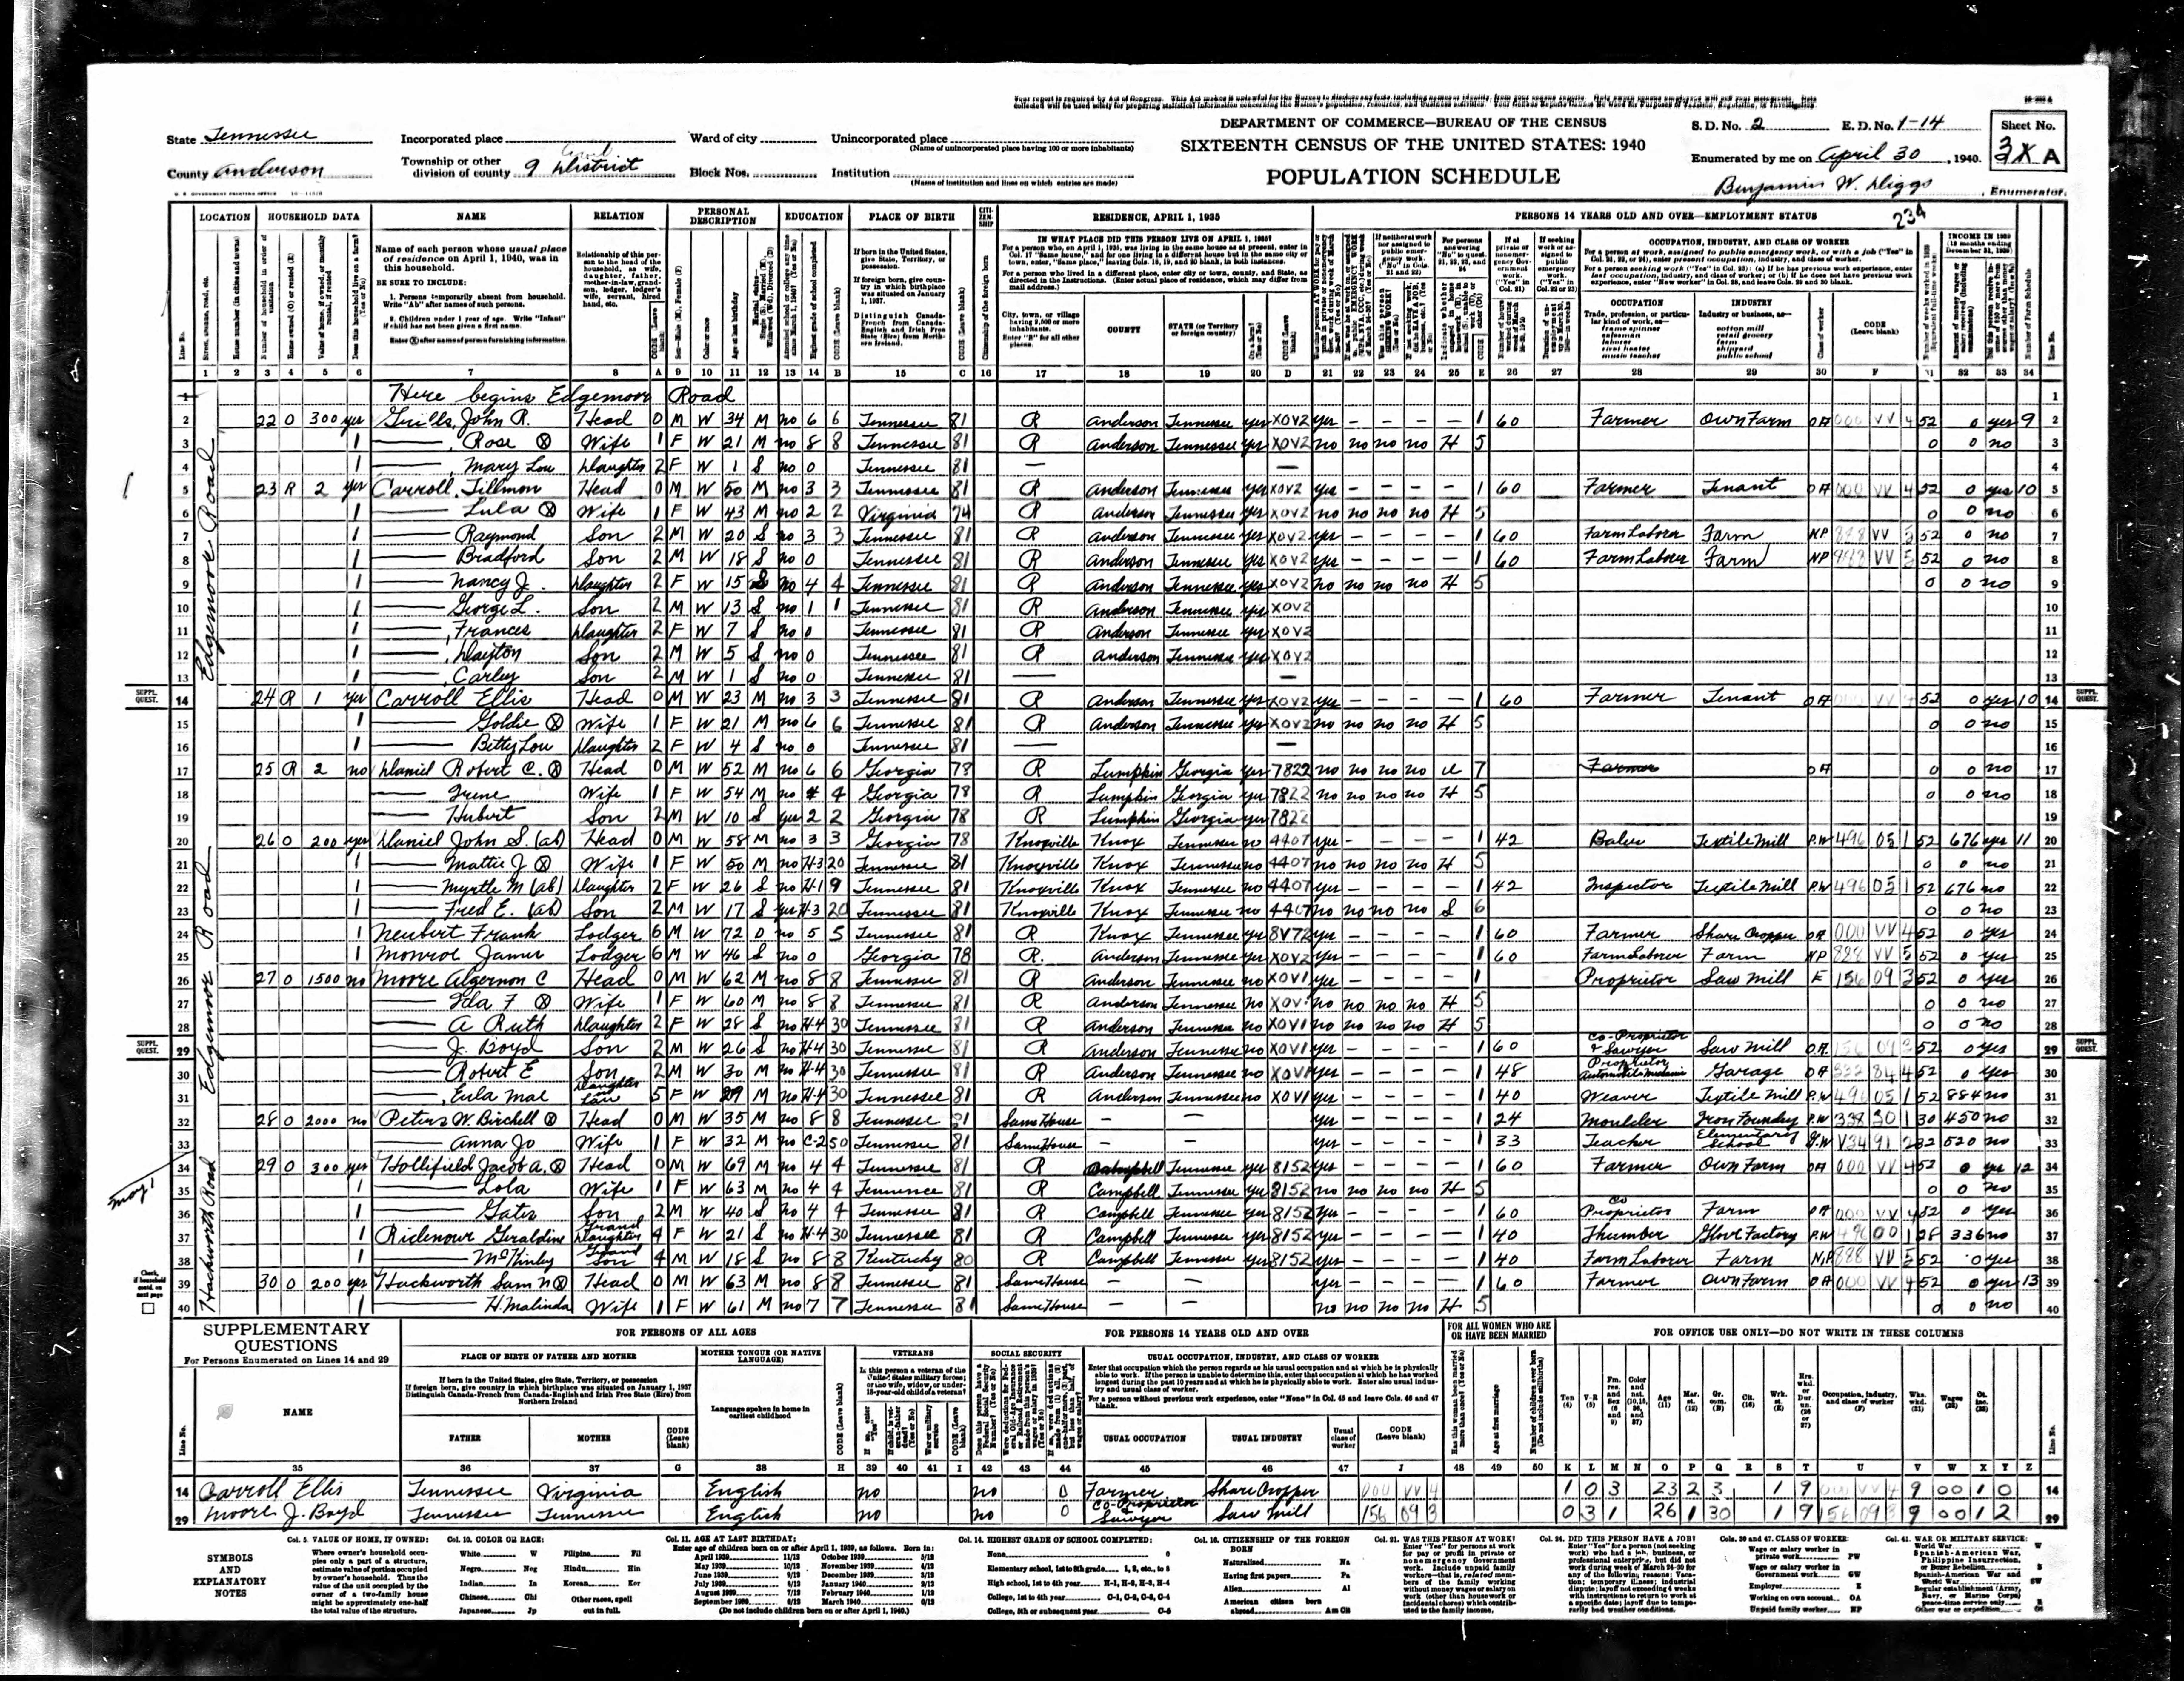 1940 U.S. Census, Anderson County, Tennessee, Dist. 9, page 234a